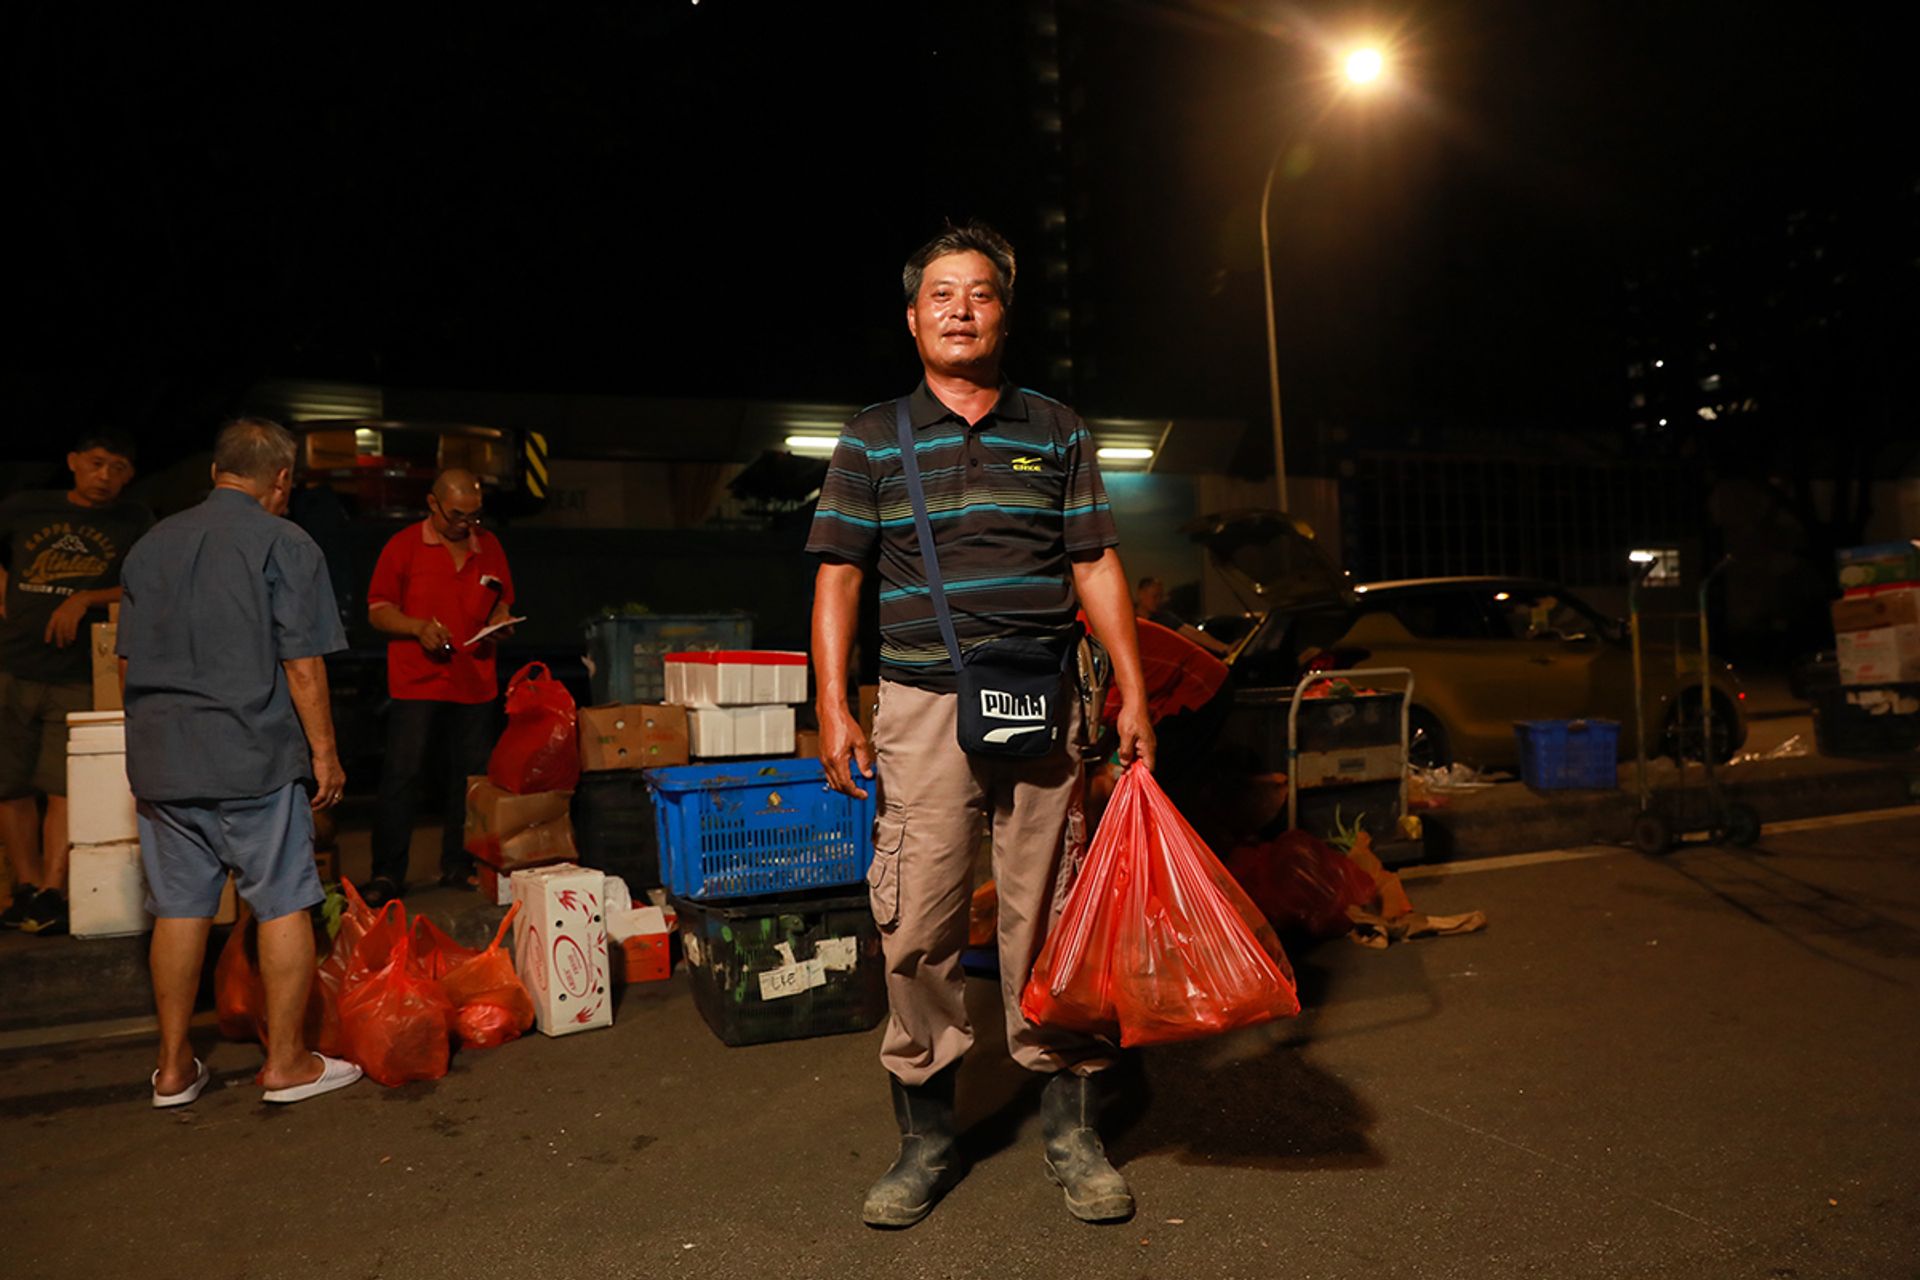 Construction site supervisor Xing Hong Fei, 51, with a bag of vegetables meant for three people. He visits the market daily after work at the nearby BTO project.